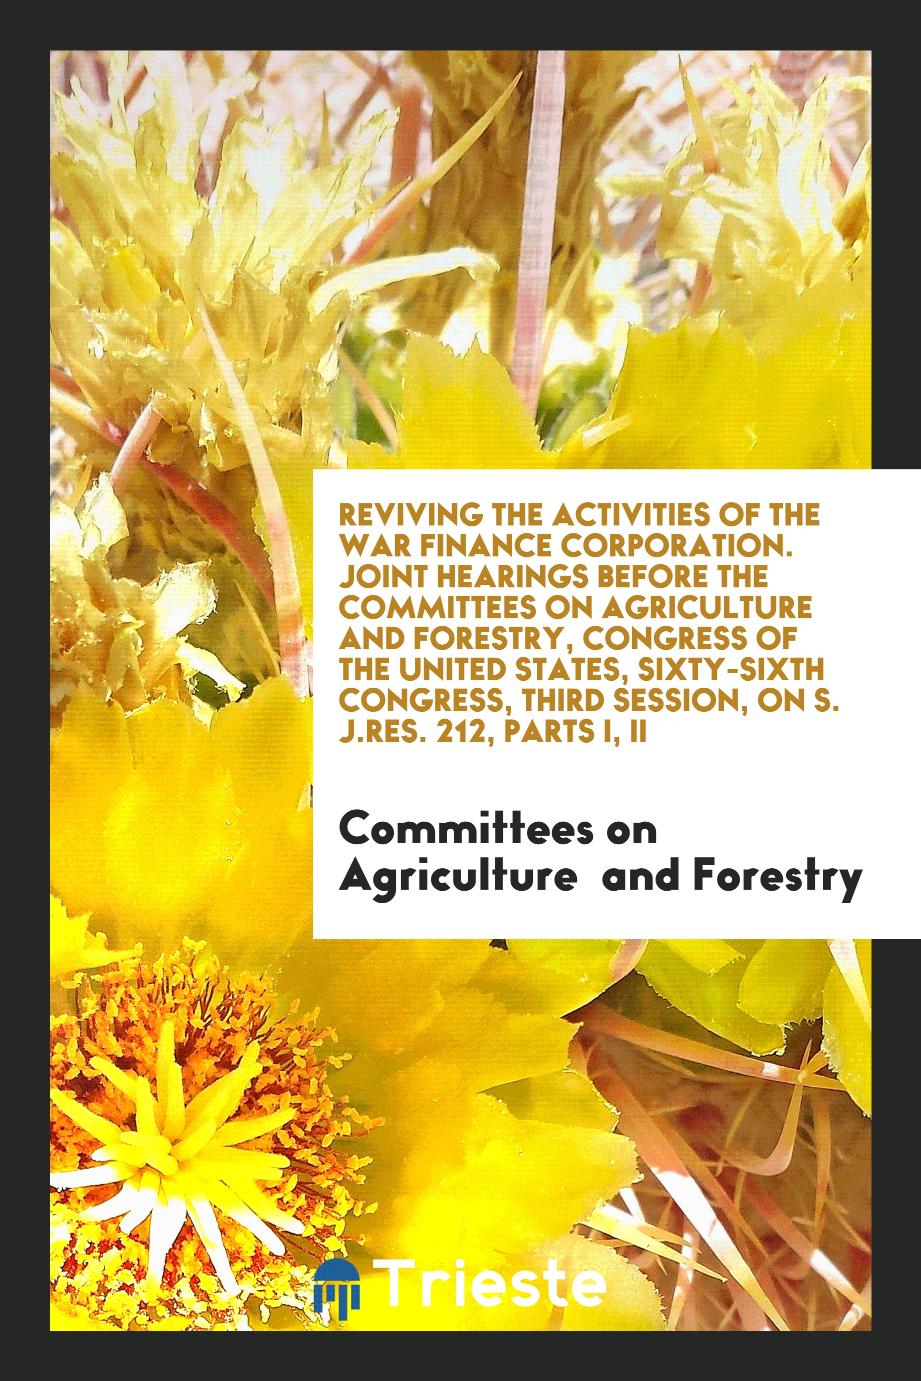 Reviving the Activities of the War Finance Corporation. Joint Hearings Before the Committees on Agriculture and Forestry, Congress of the United States, Sixty-Sixth Congress, Third Session, on S. J.Res. 212, Parts I, II